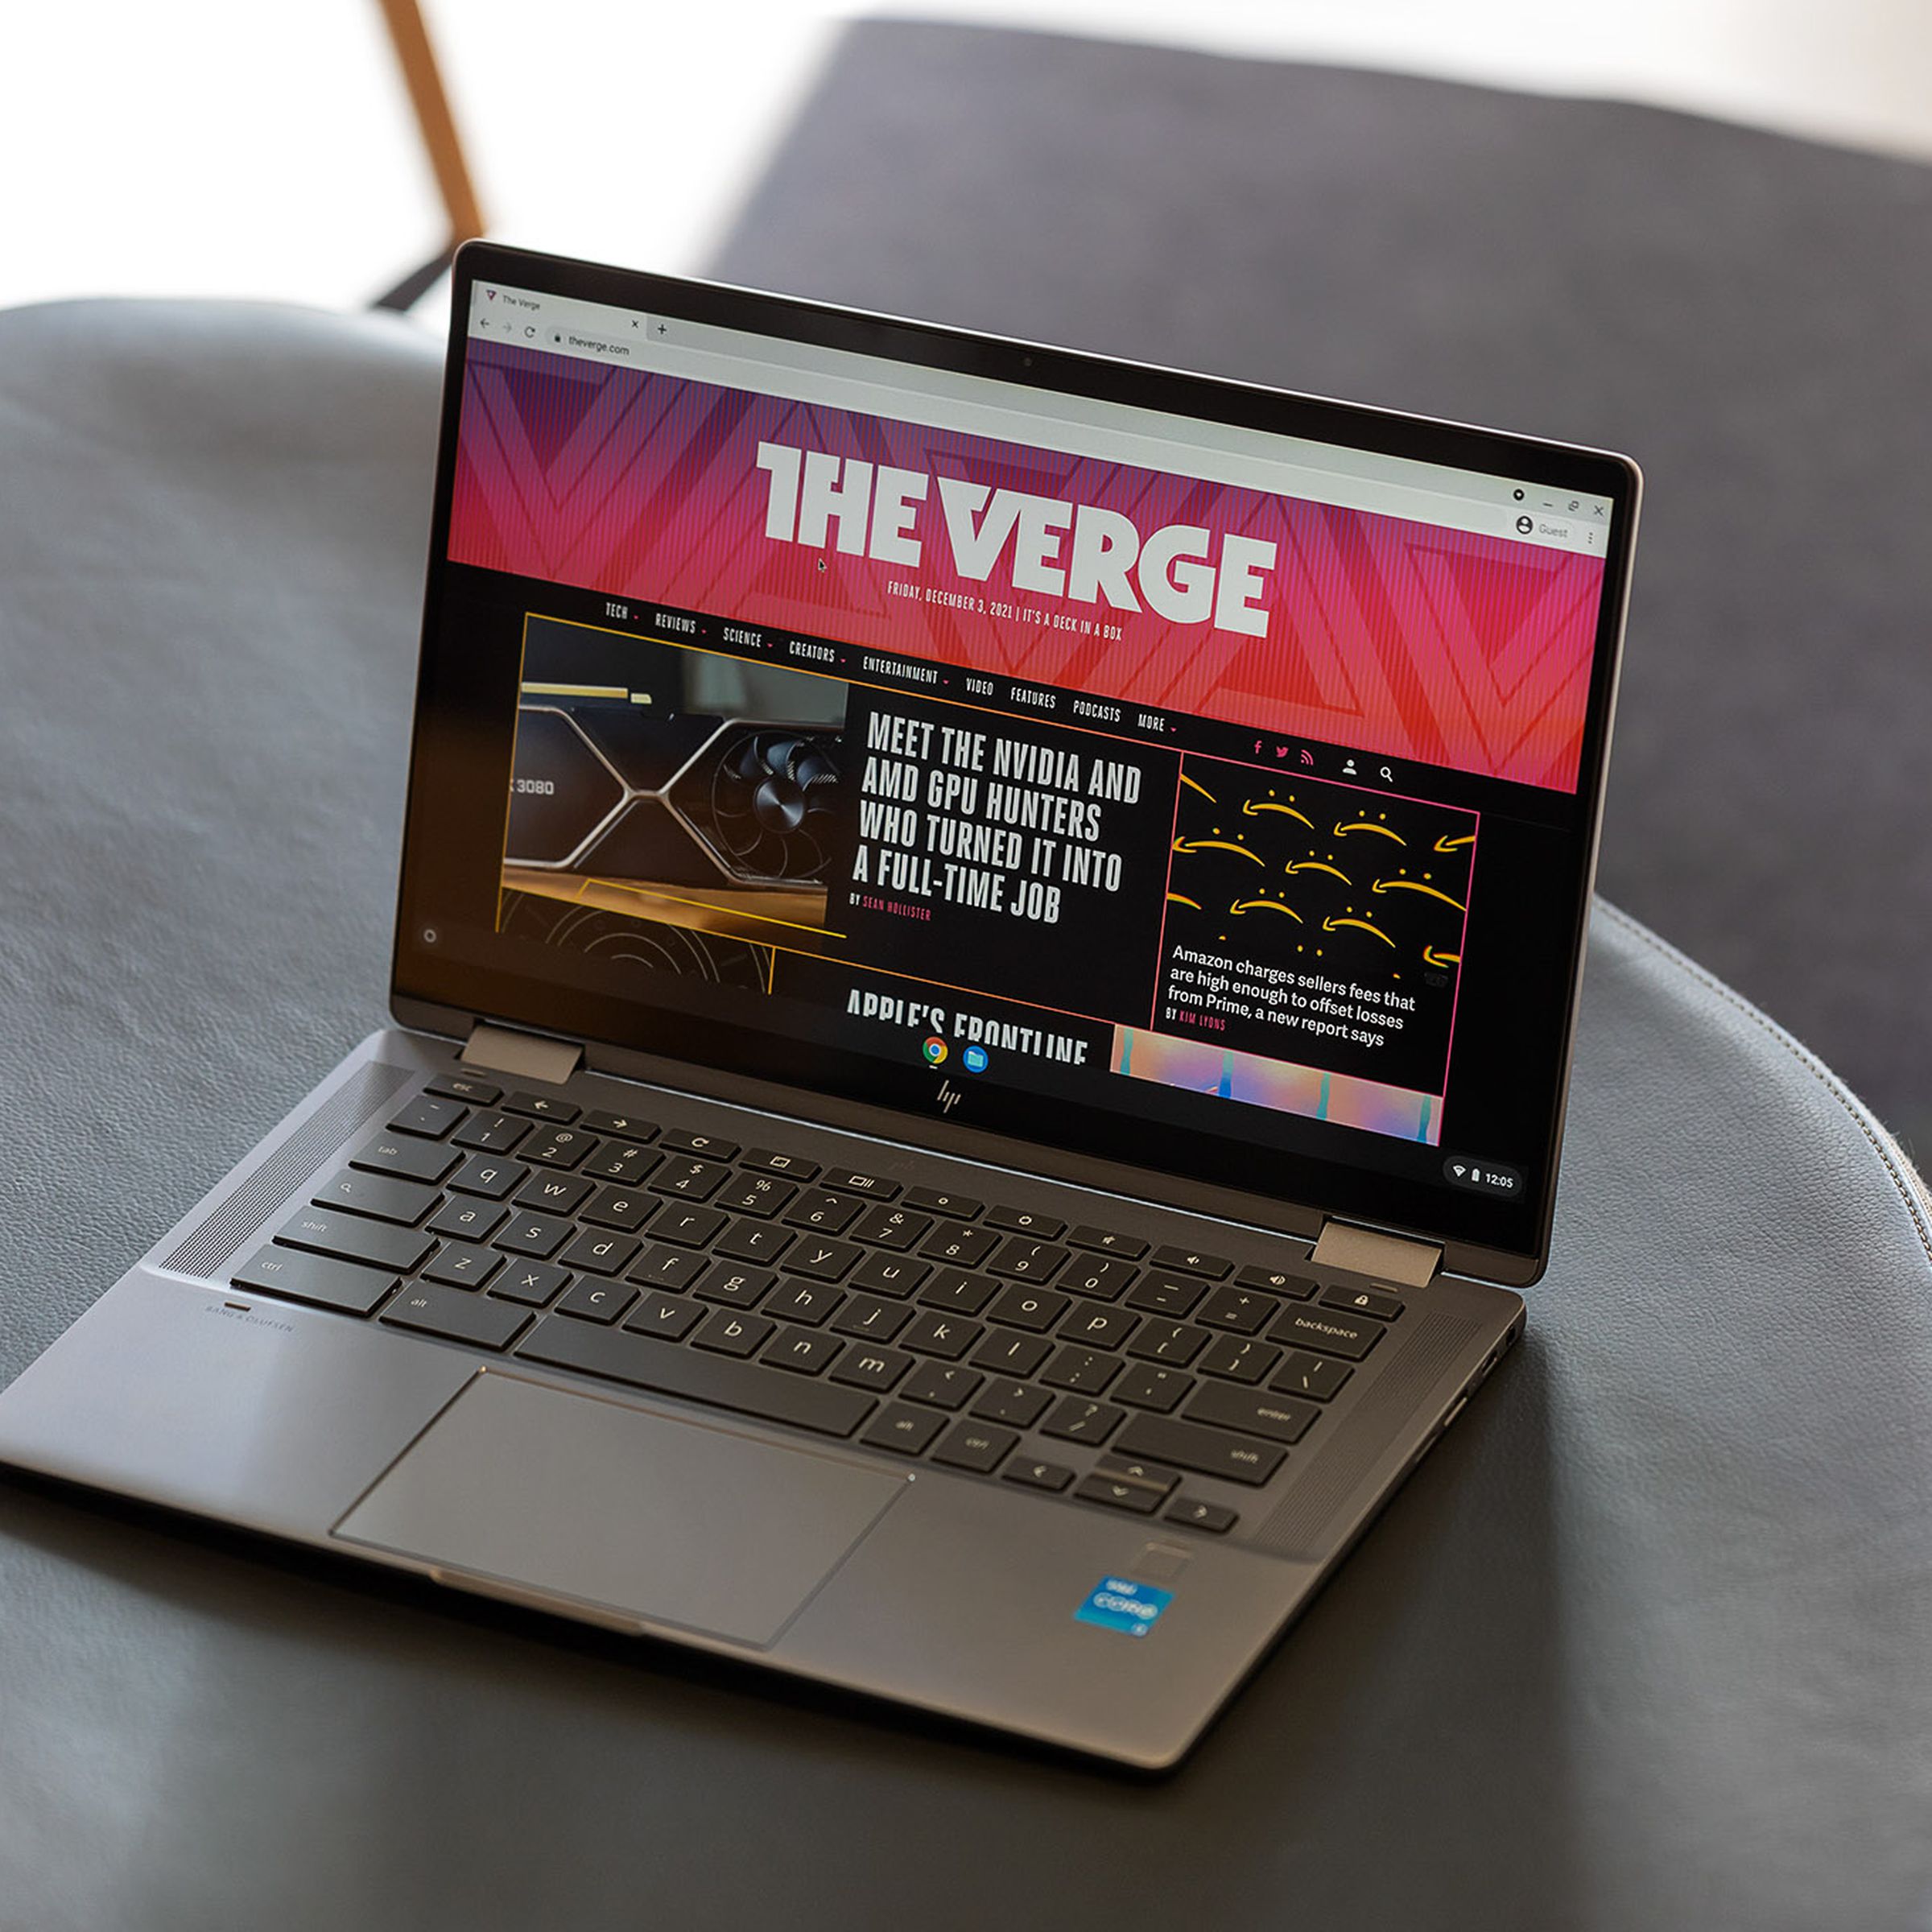 The HP Chromebook x360 14c open on a gray bench seen from above and to the right. The screen displays The Verge homepage.